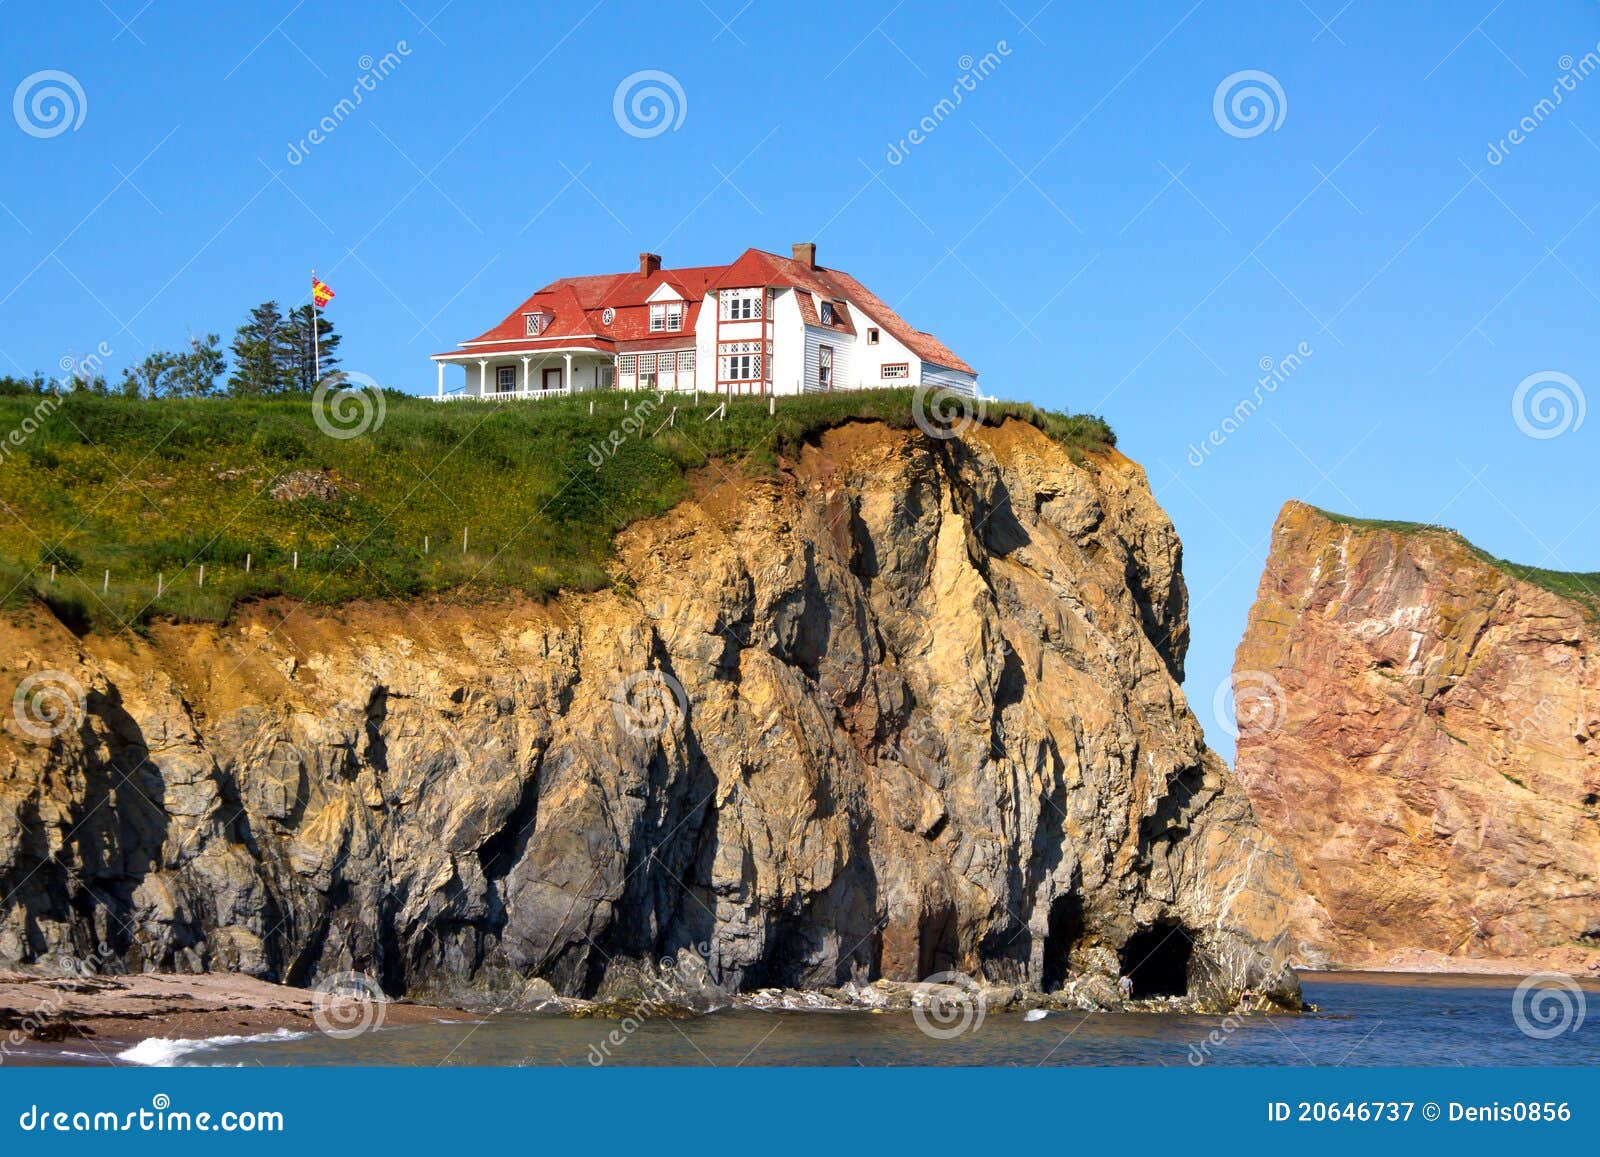 the red house on cliff